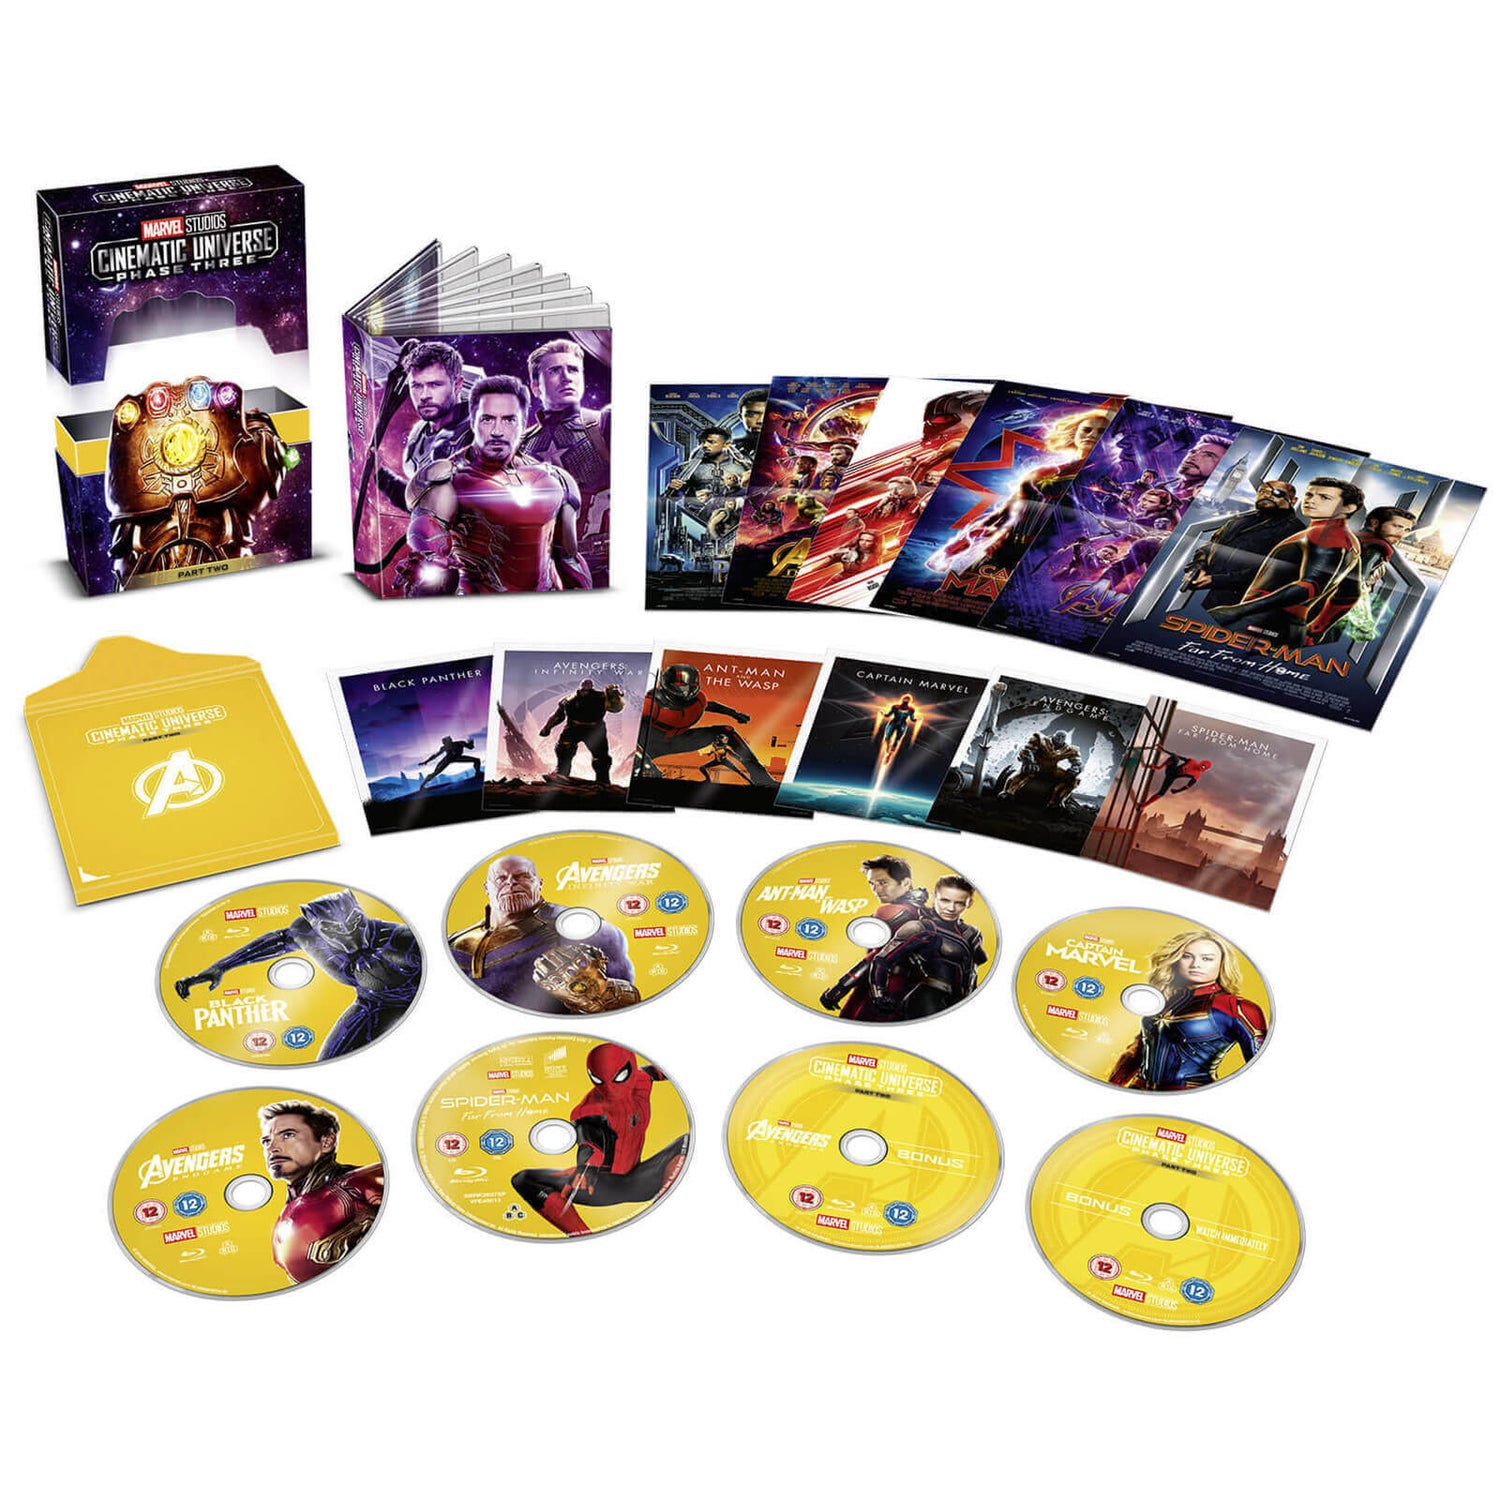 Marvel Studios Collector's Edition Box Set - Phase 3 Part 2 Blu